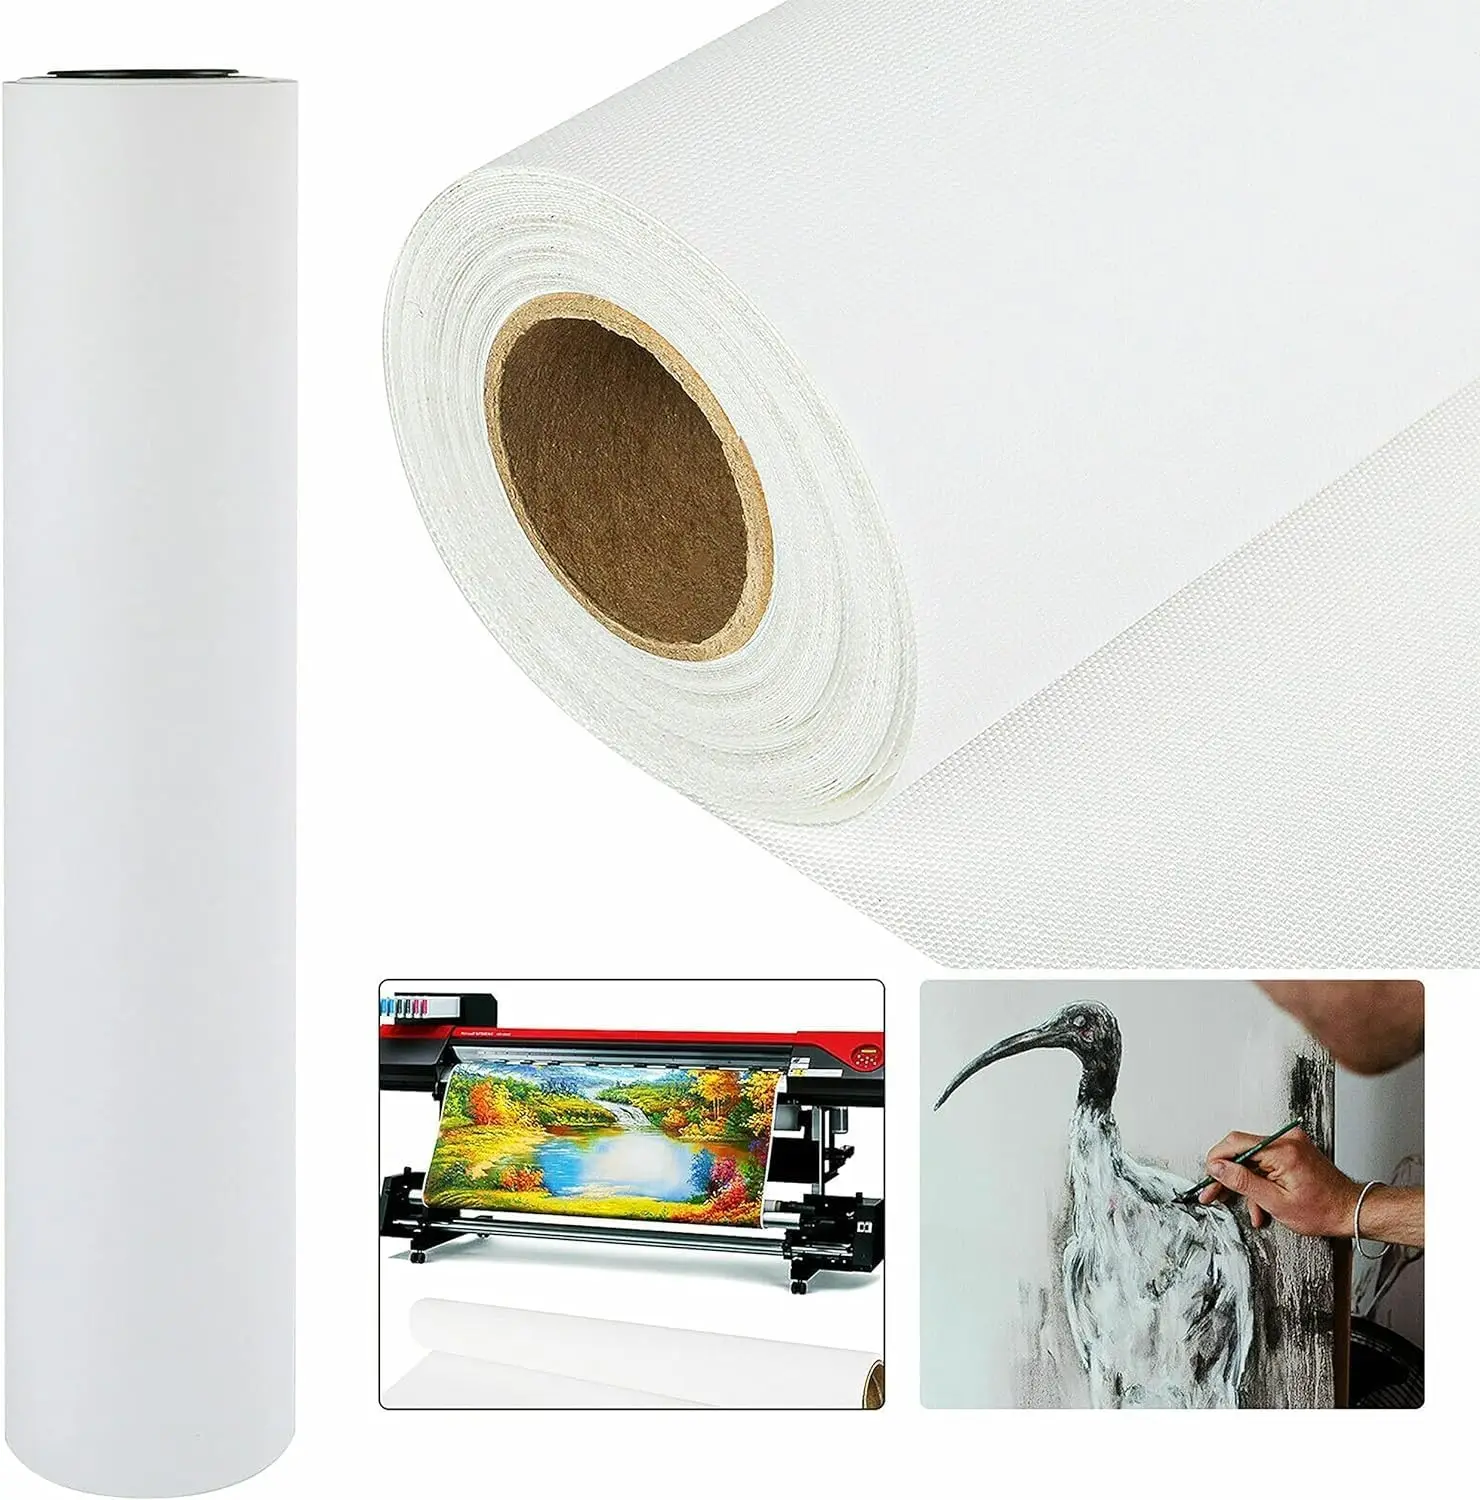 Digital Canvas Roll Wall Art Large Fabric Pure Cotton White Blank Waterproof Painting Canvas For Acrylic Paint Marker